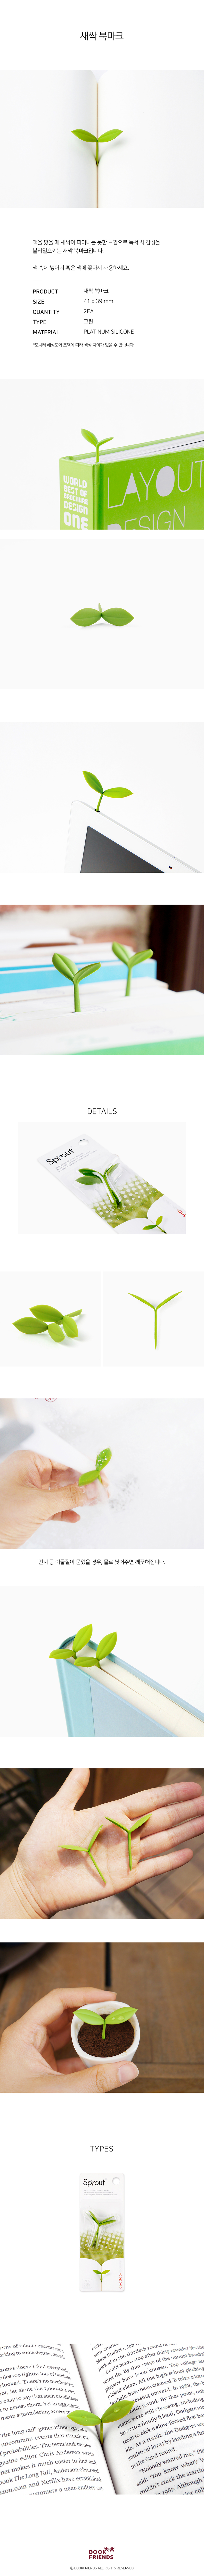 sprout_bookmark.jpg